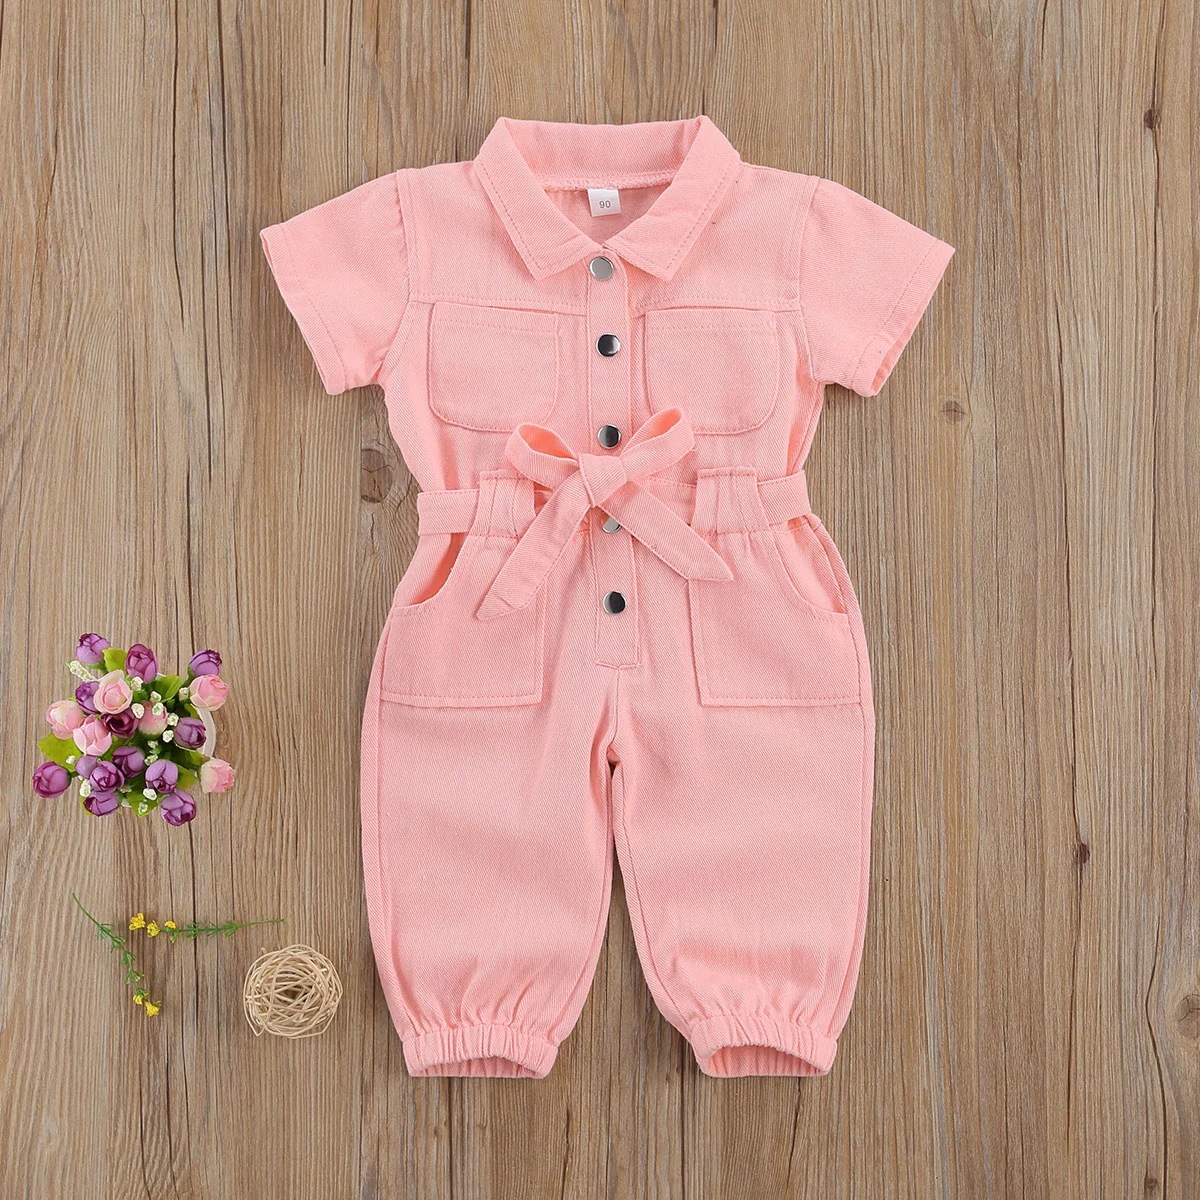 Baby Girl Half Sleeve Pink Jumpsuit For Summer